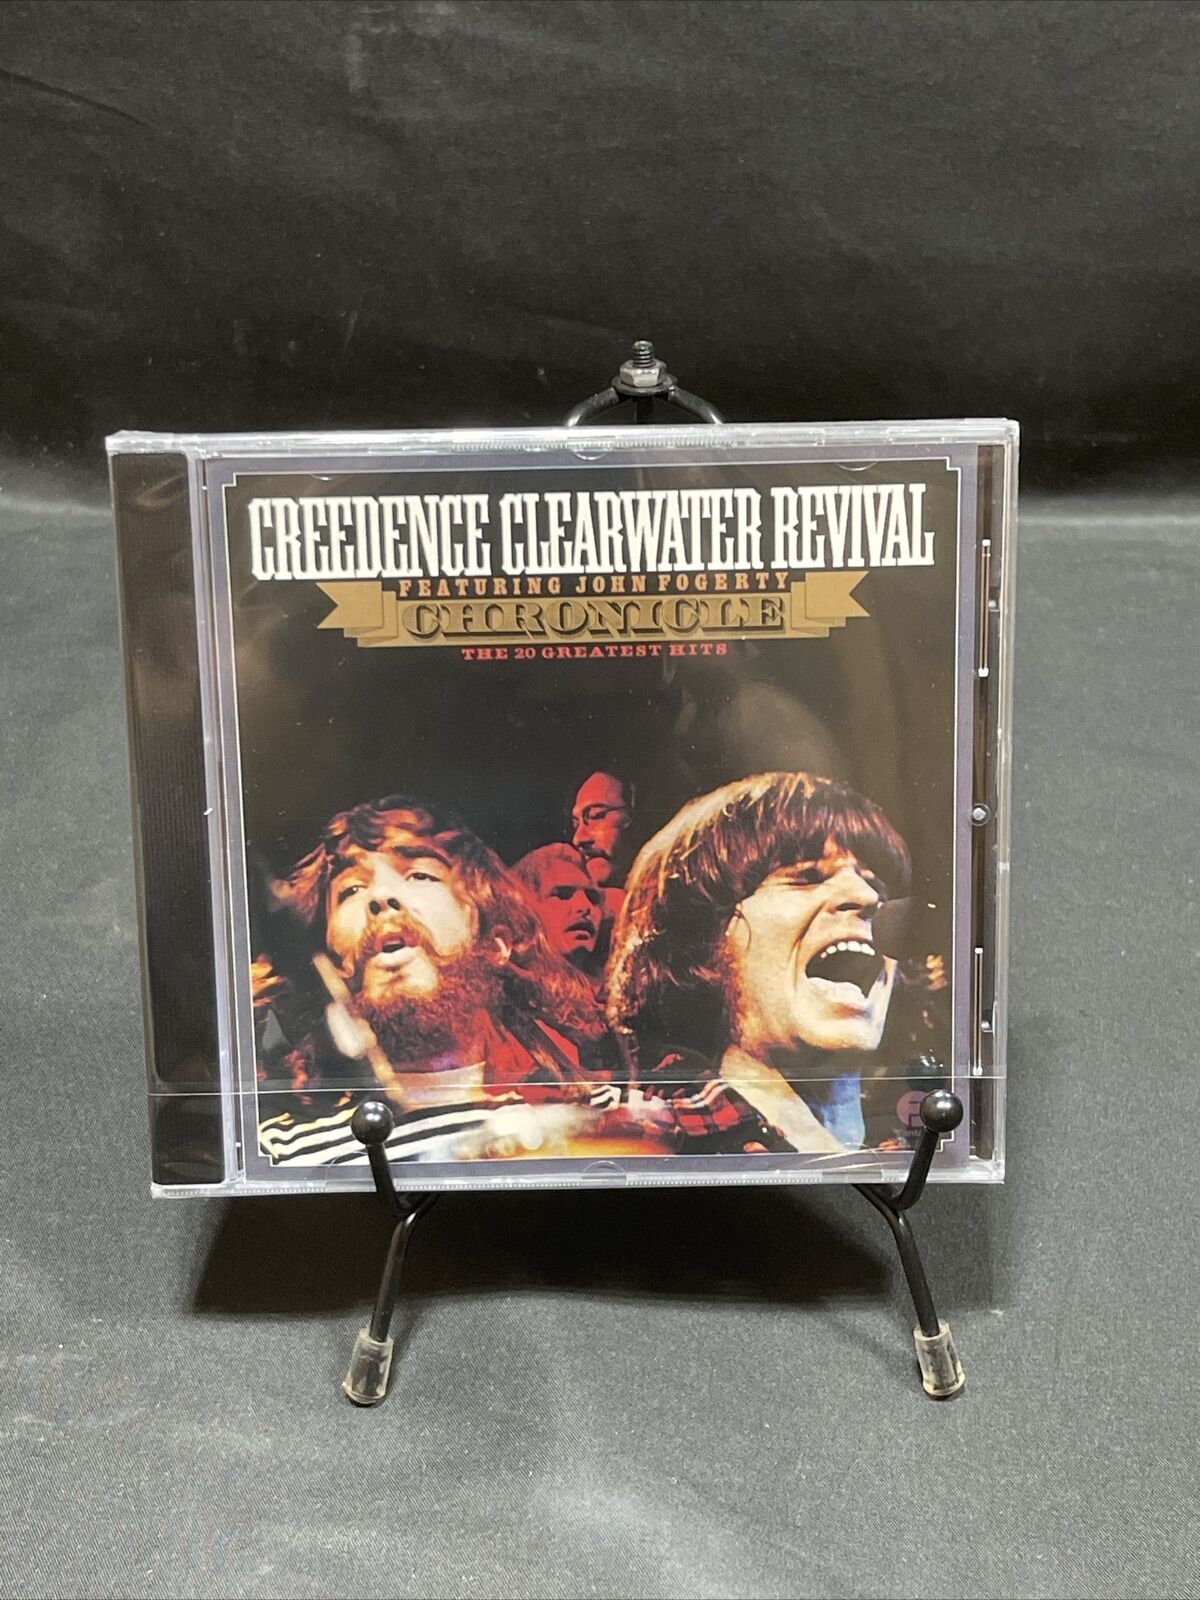 Chronicle by Creedence Clearwater Revival (CD, 1990)